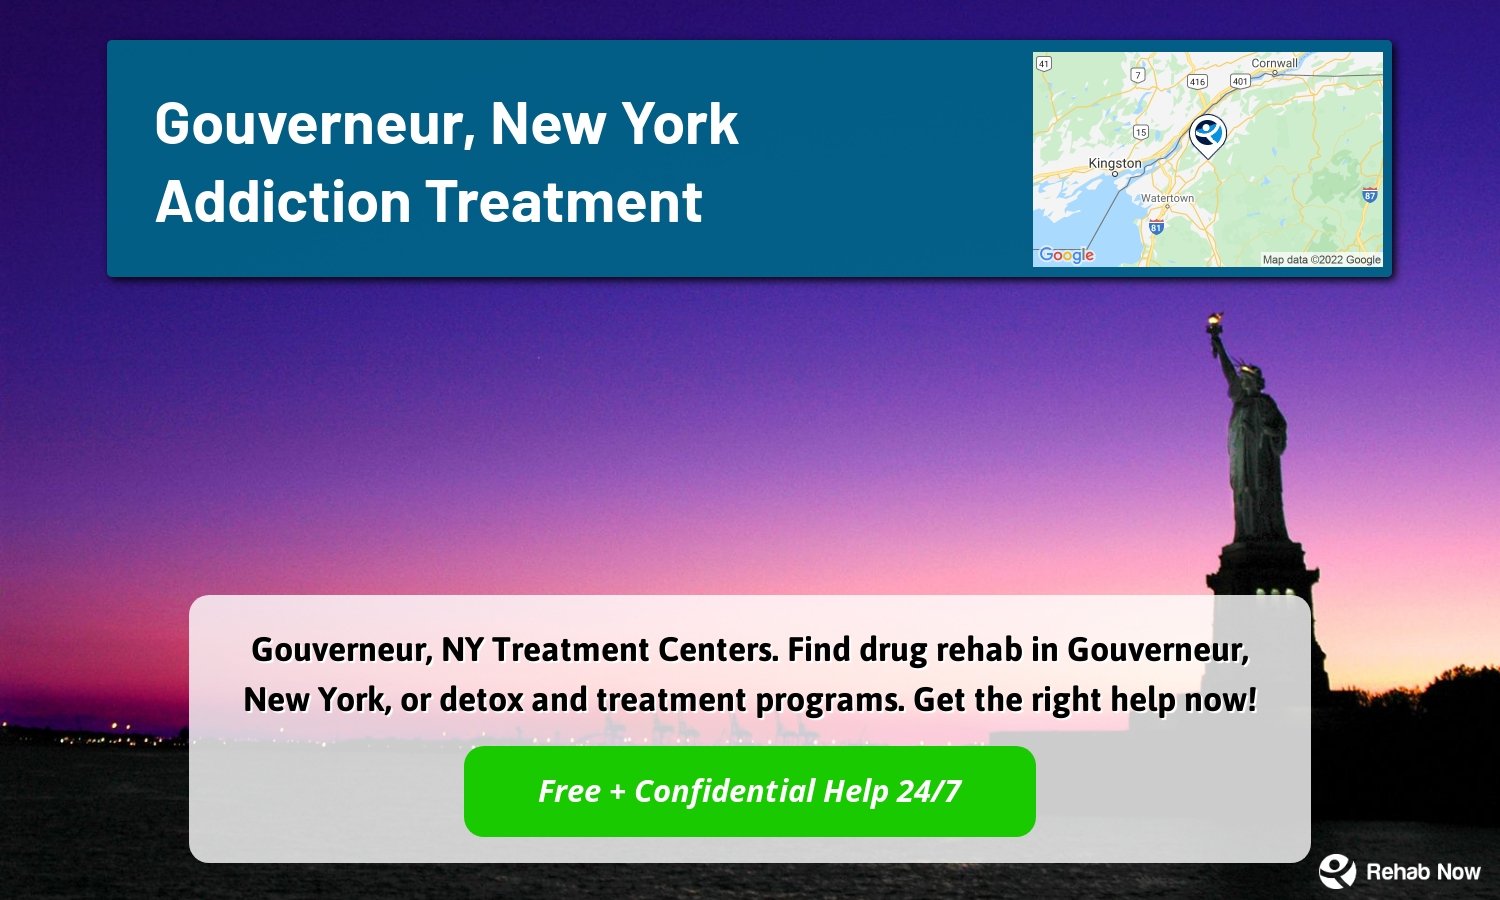 Gouverneur, NY Treatment Centers. Find drug rehab in Gouverneur, New York, or detox and treatment programs. Get the right help now!